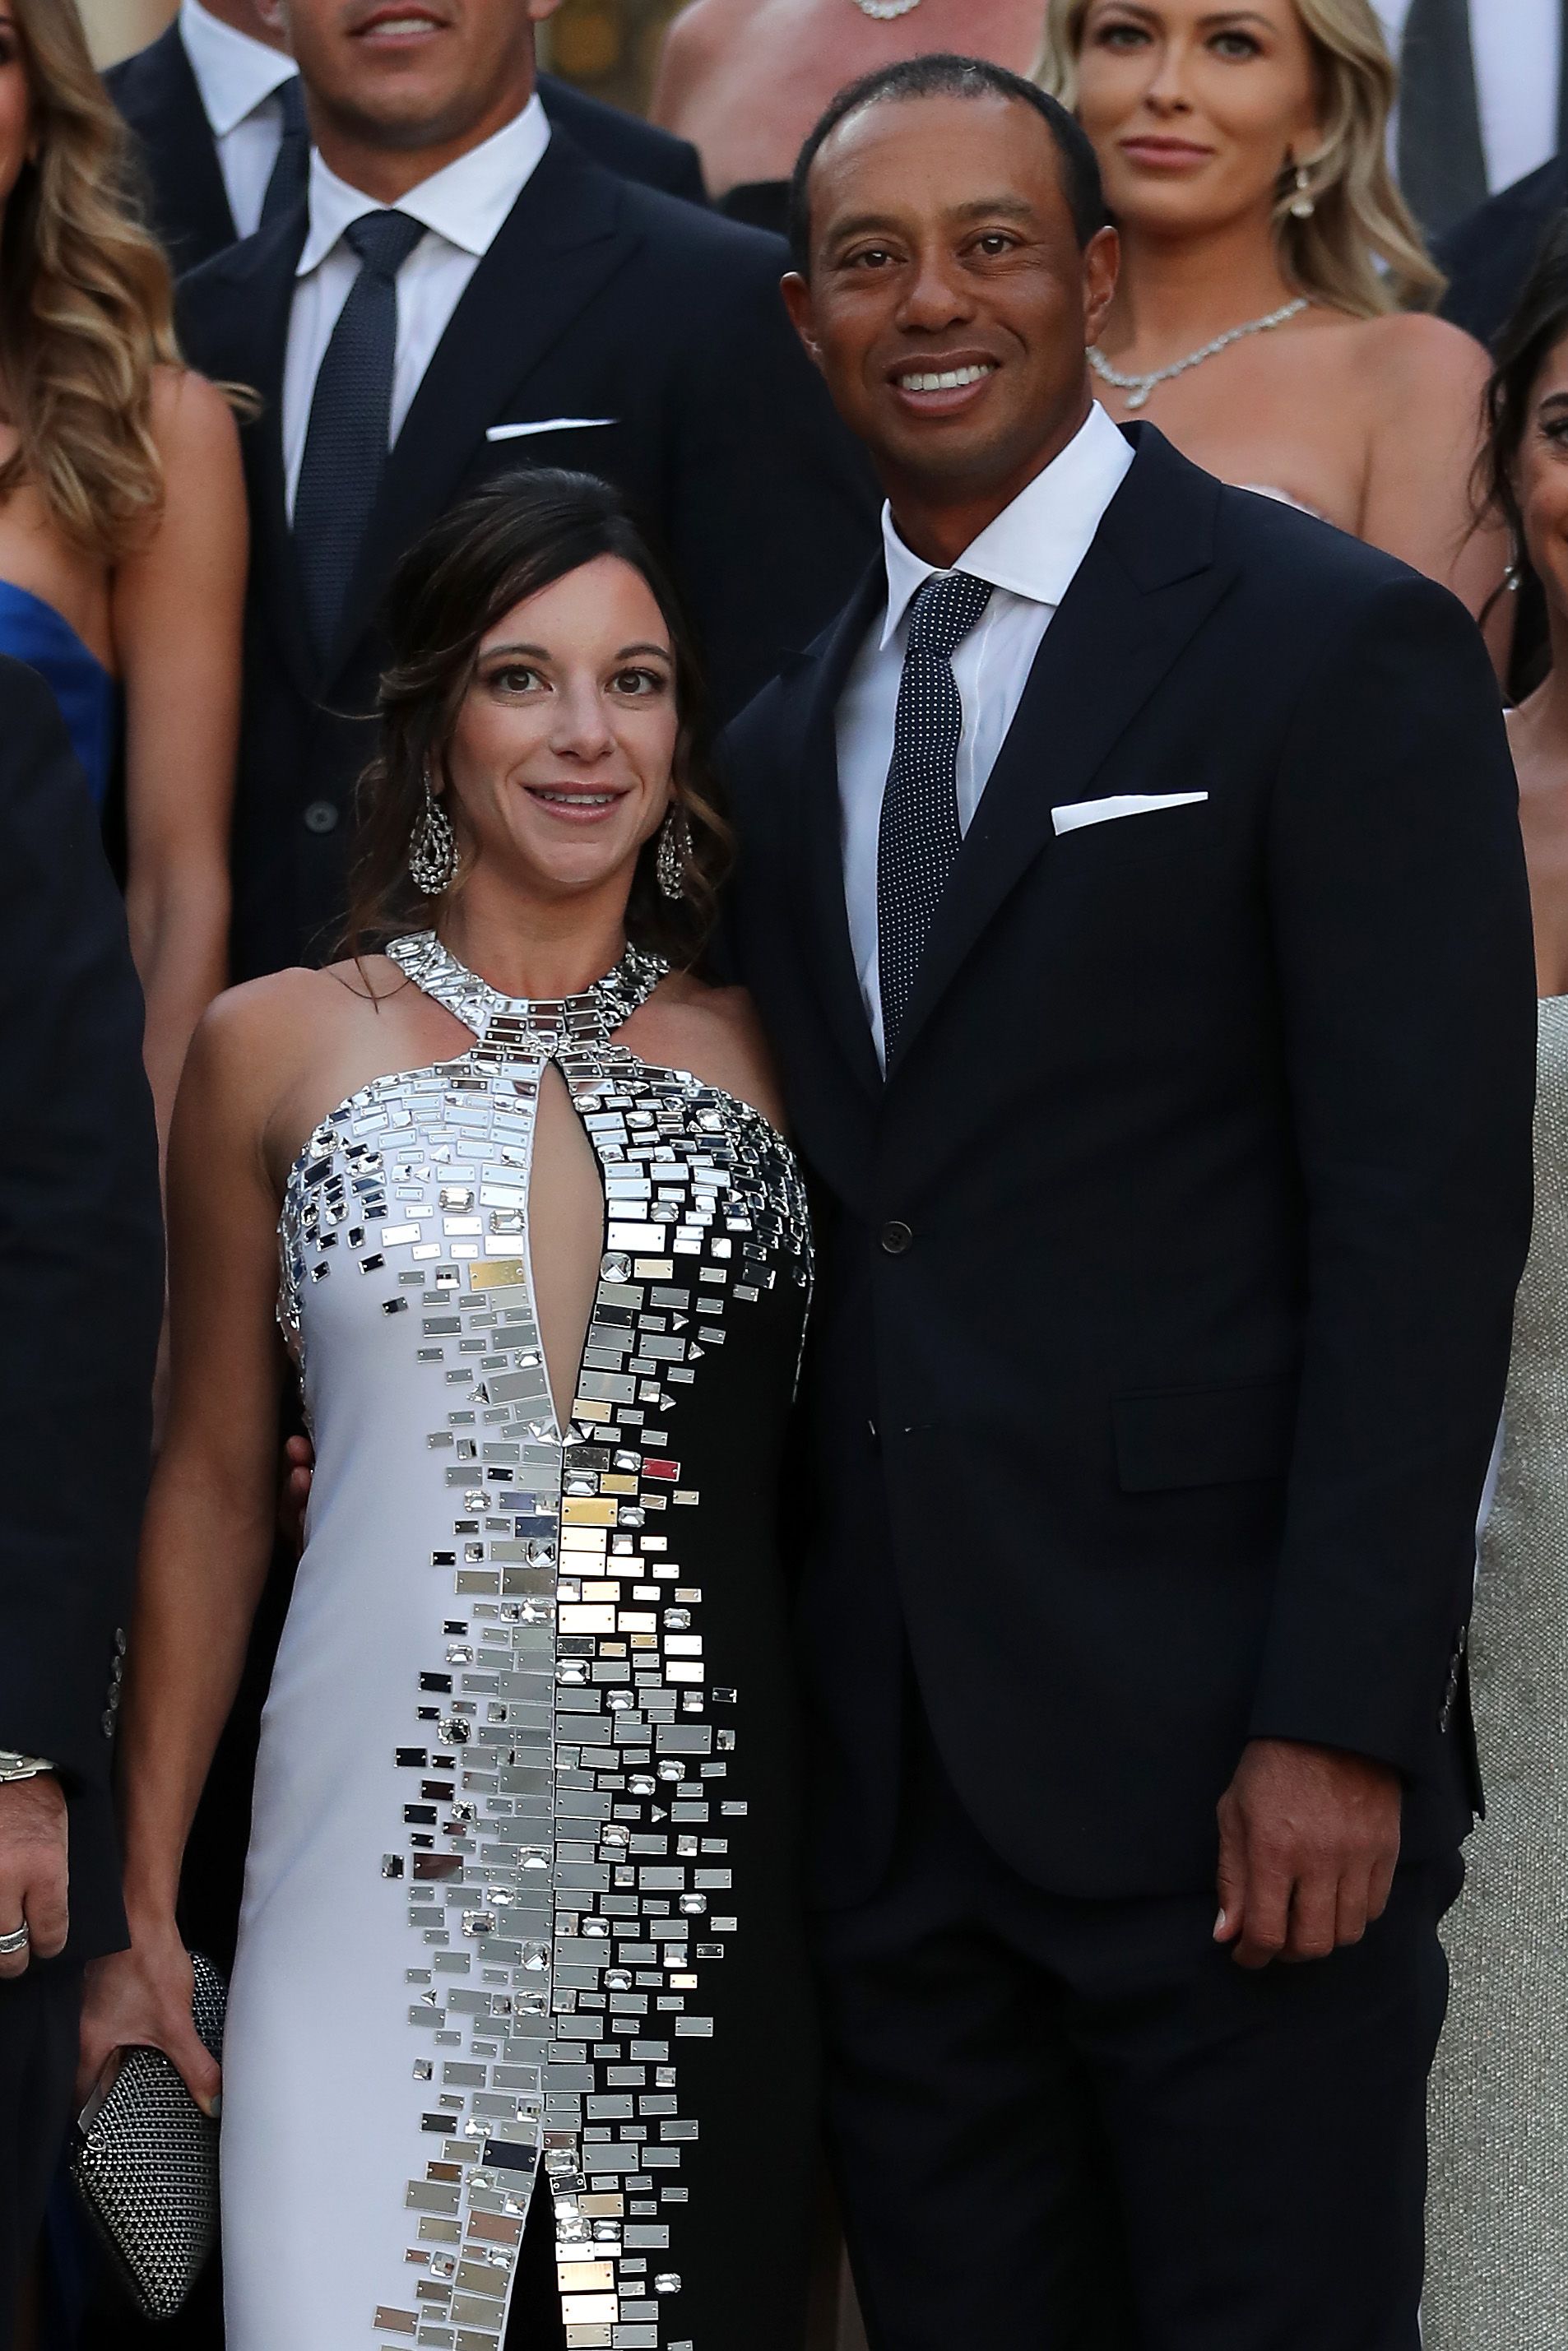 Tiger Woods poses with girlfriend Erica Herman before the Ryder Cup gala dinner at the Palace of Versailles ahead of the 2018 Ryder Cup on September 26, 2018 in Versailles, France. | Source: Getty Images